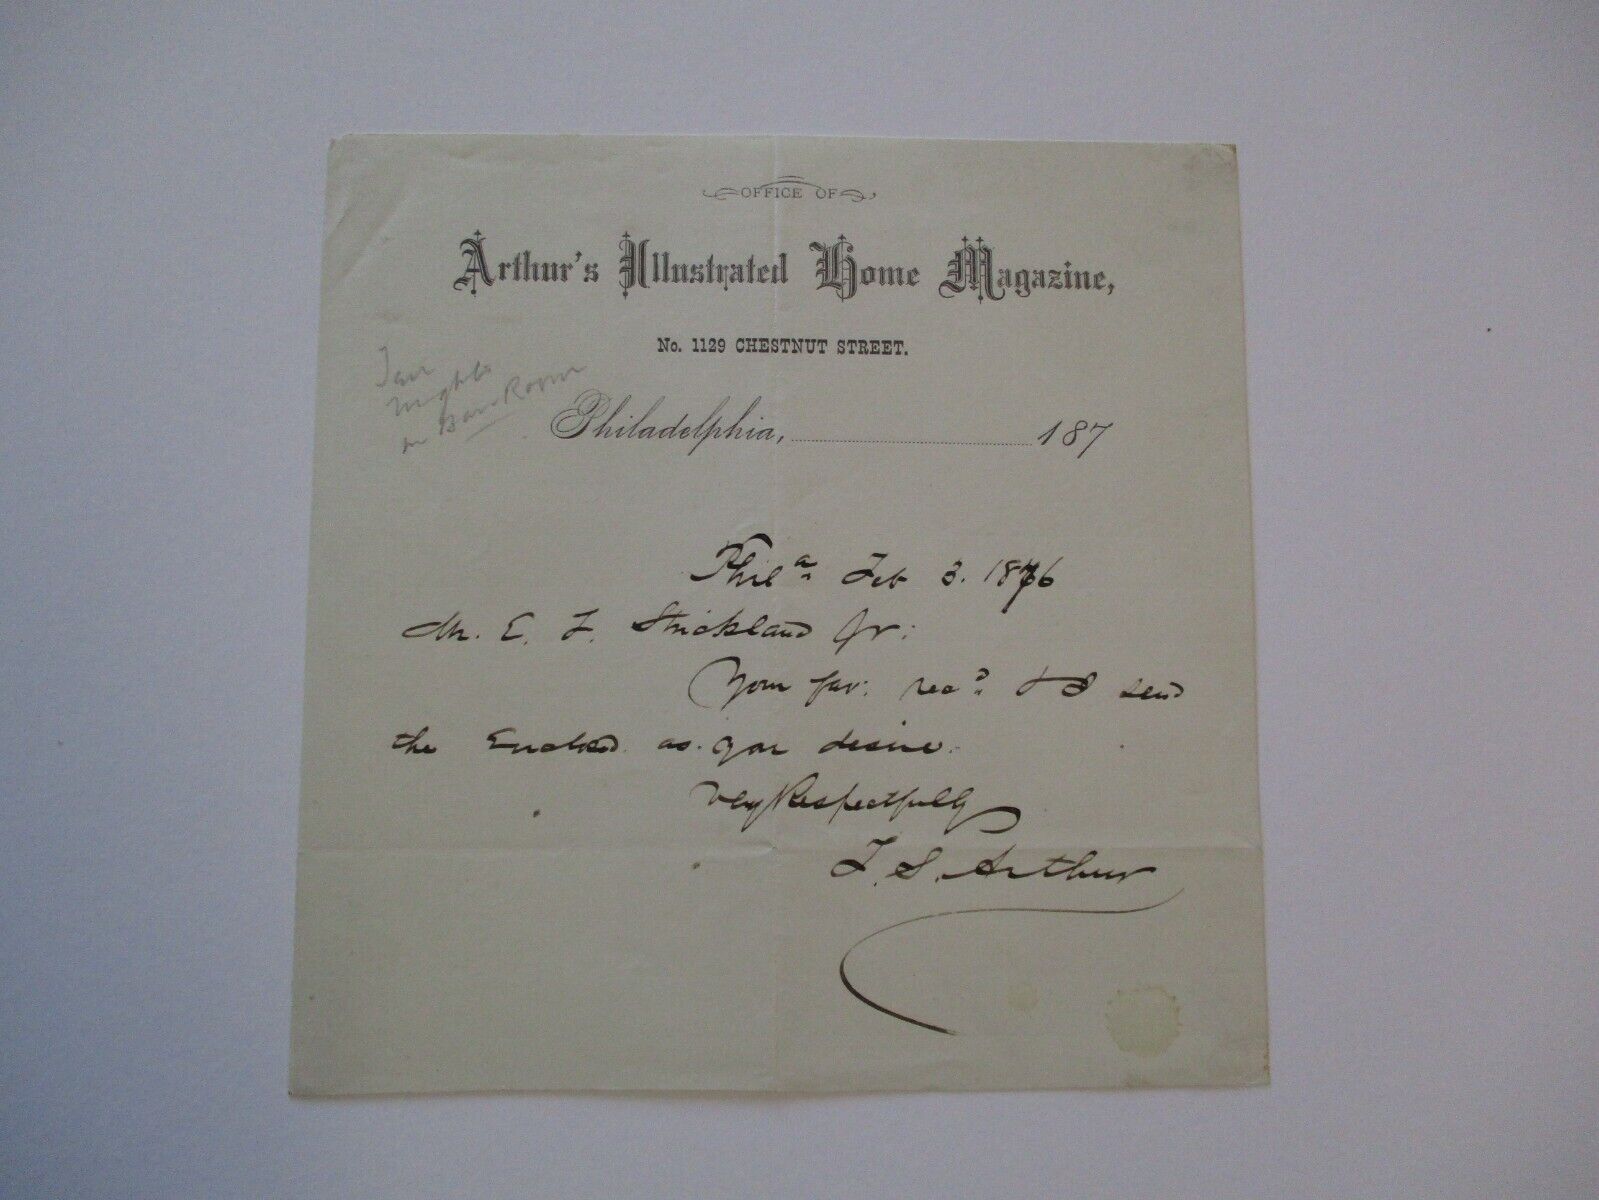 ANTIQUE LETTER BY FROM ARTHUR'S ILLUSTRATED HOME MAGAZINE SIGNED BY ARTHUR 1876